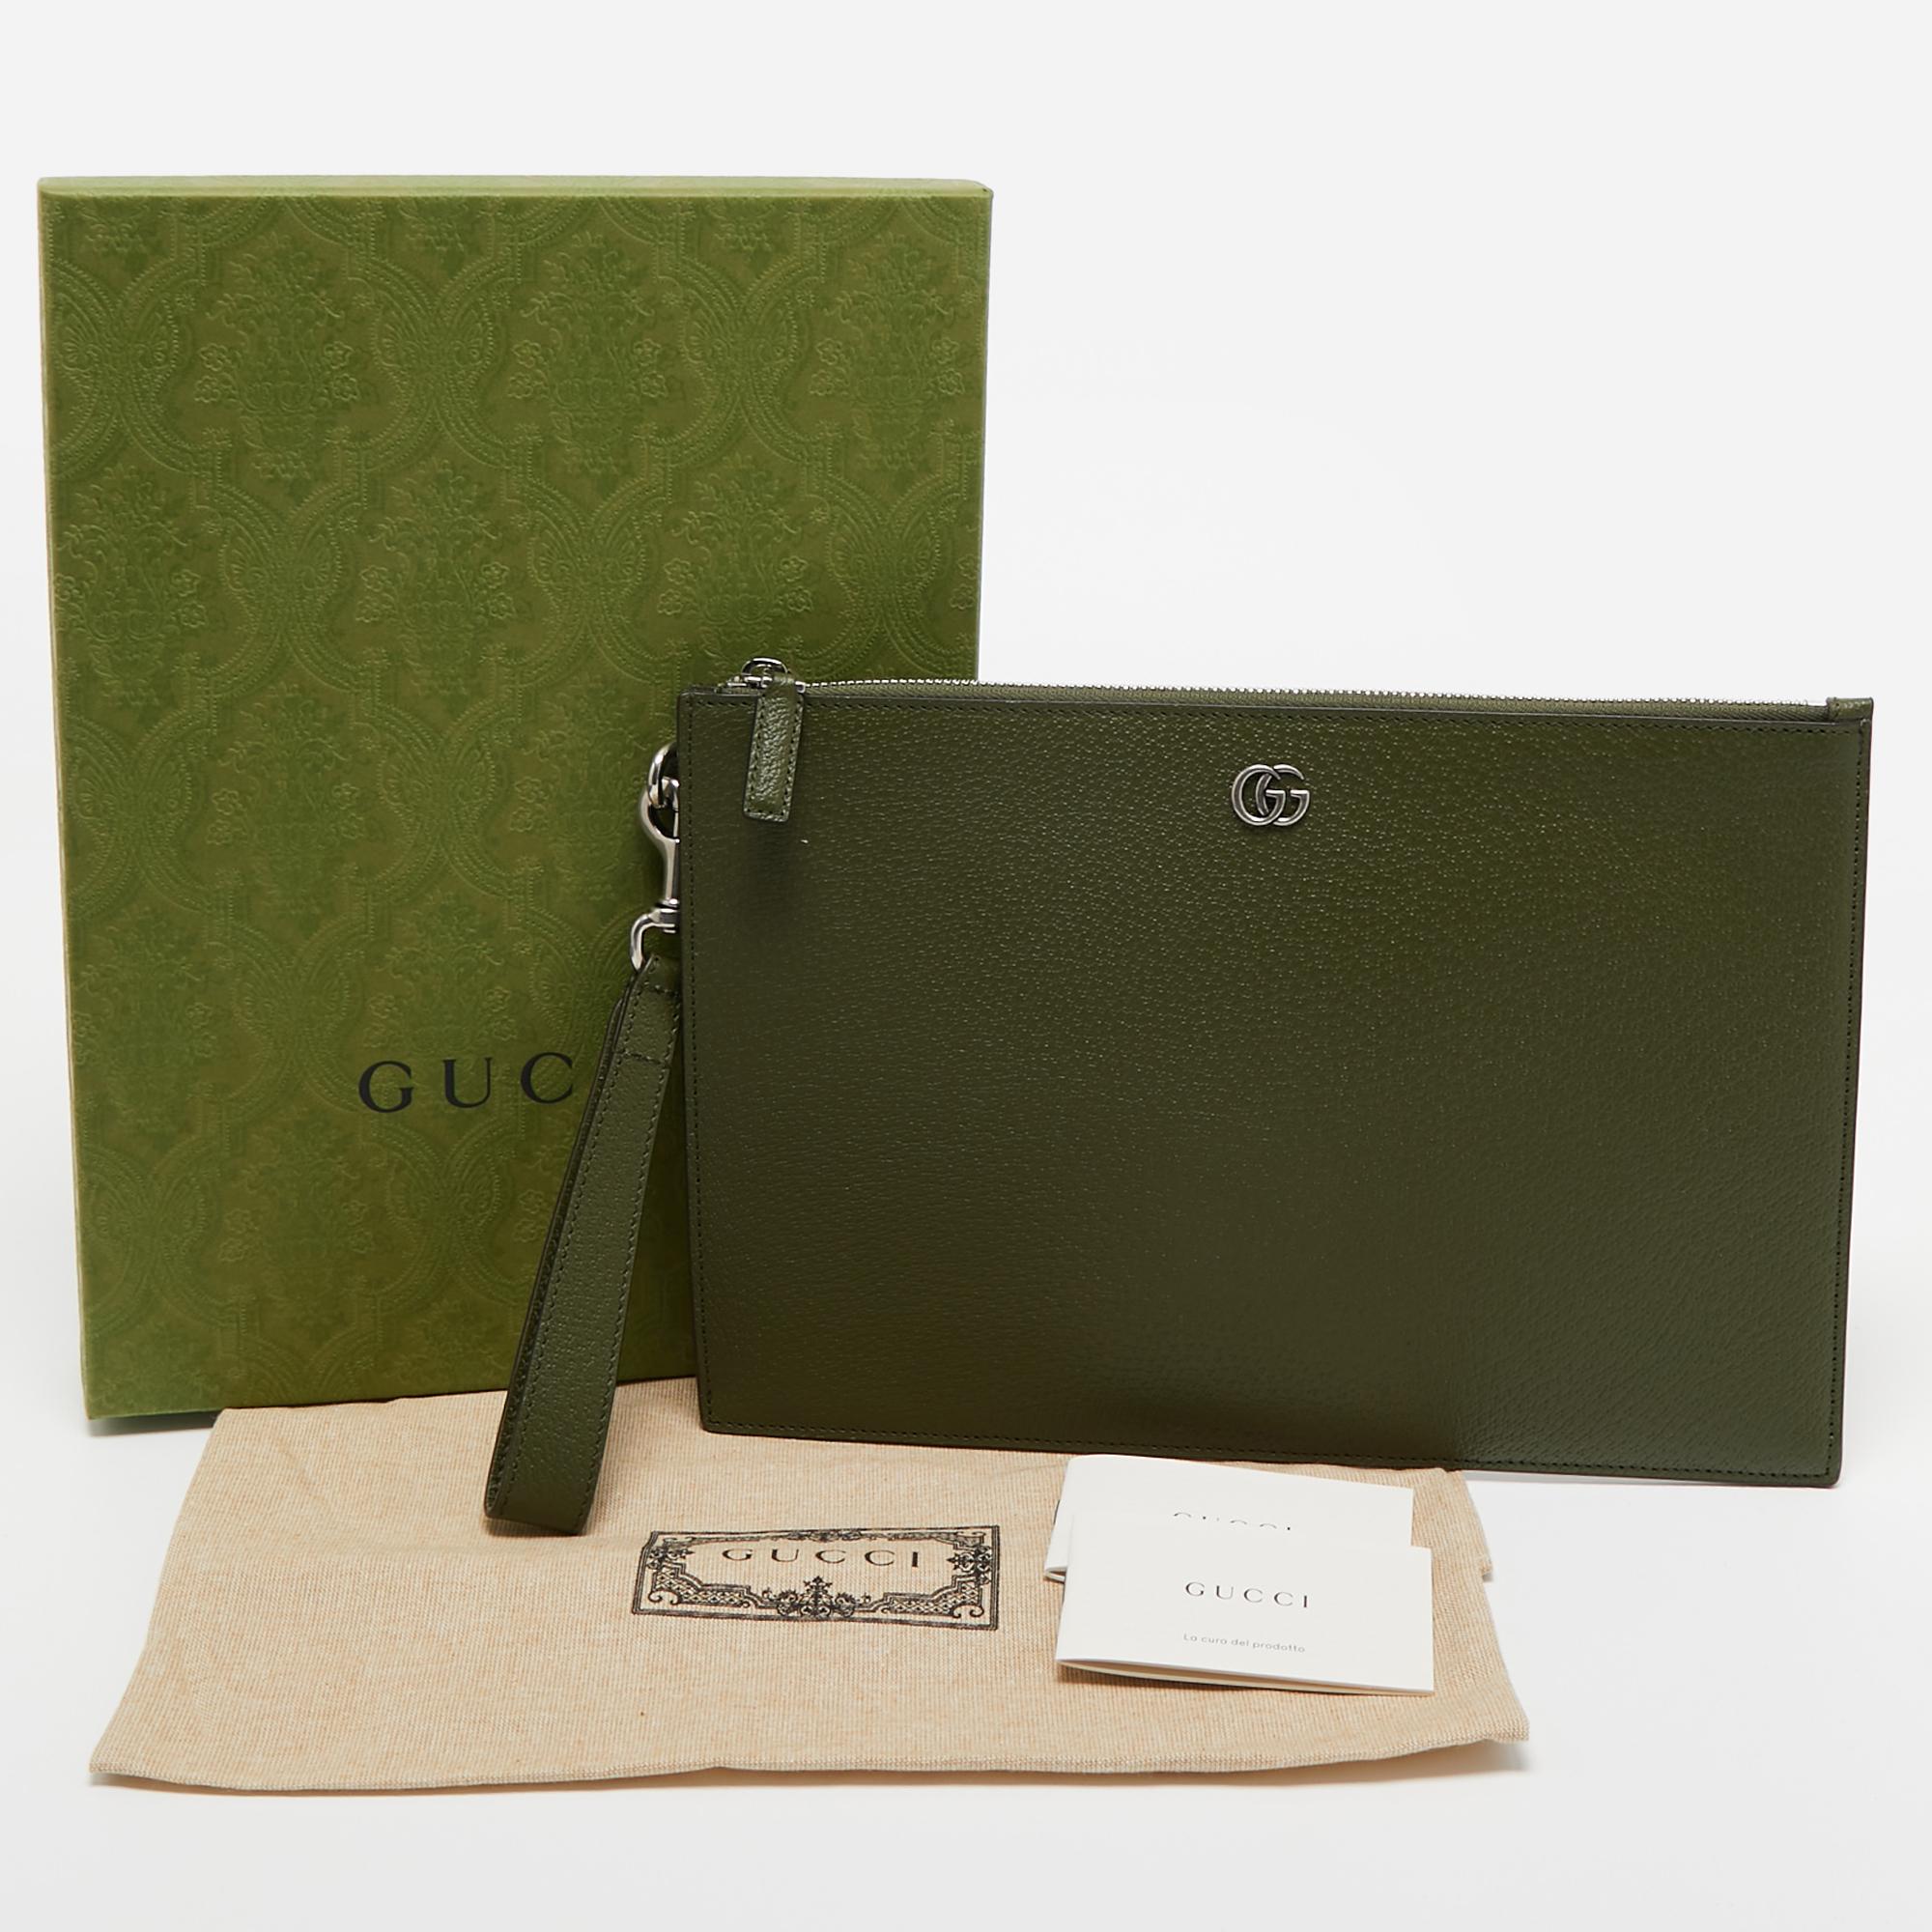 Gucci Fatigue Green Leather GG Marmont Pouch 5